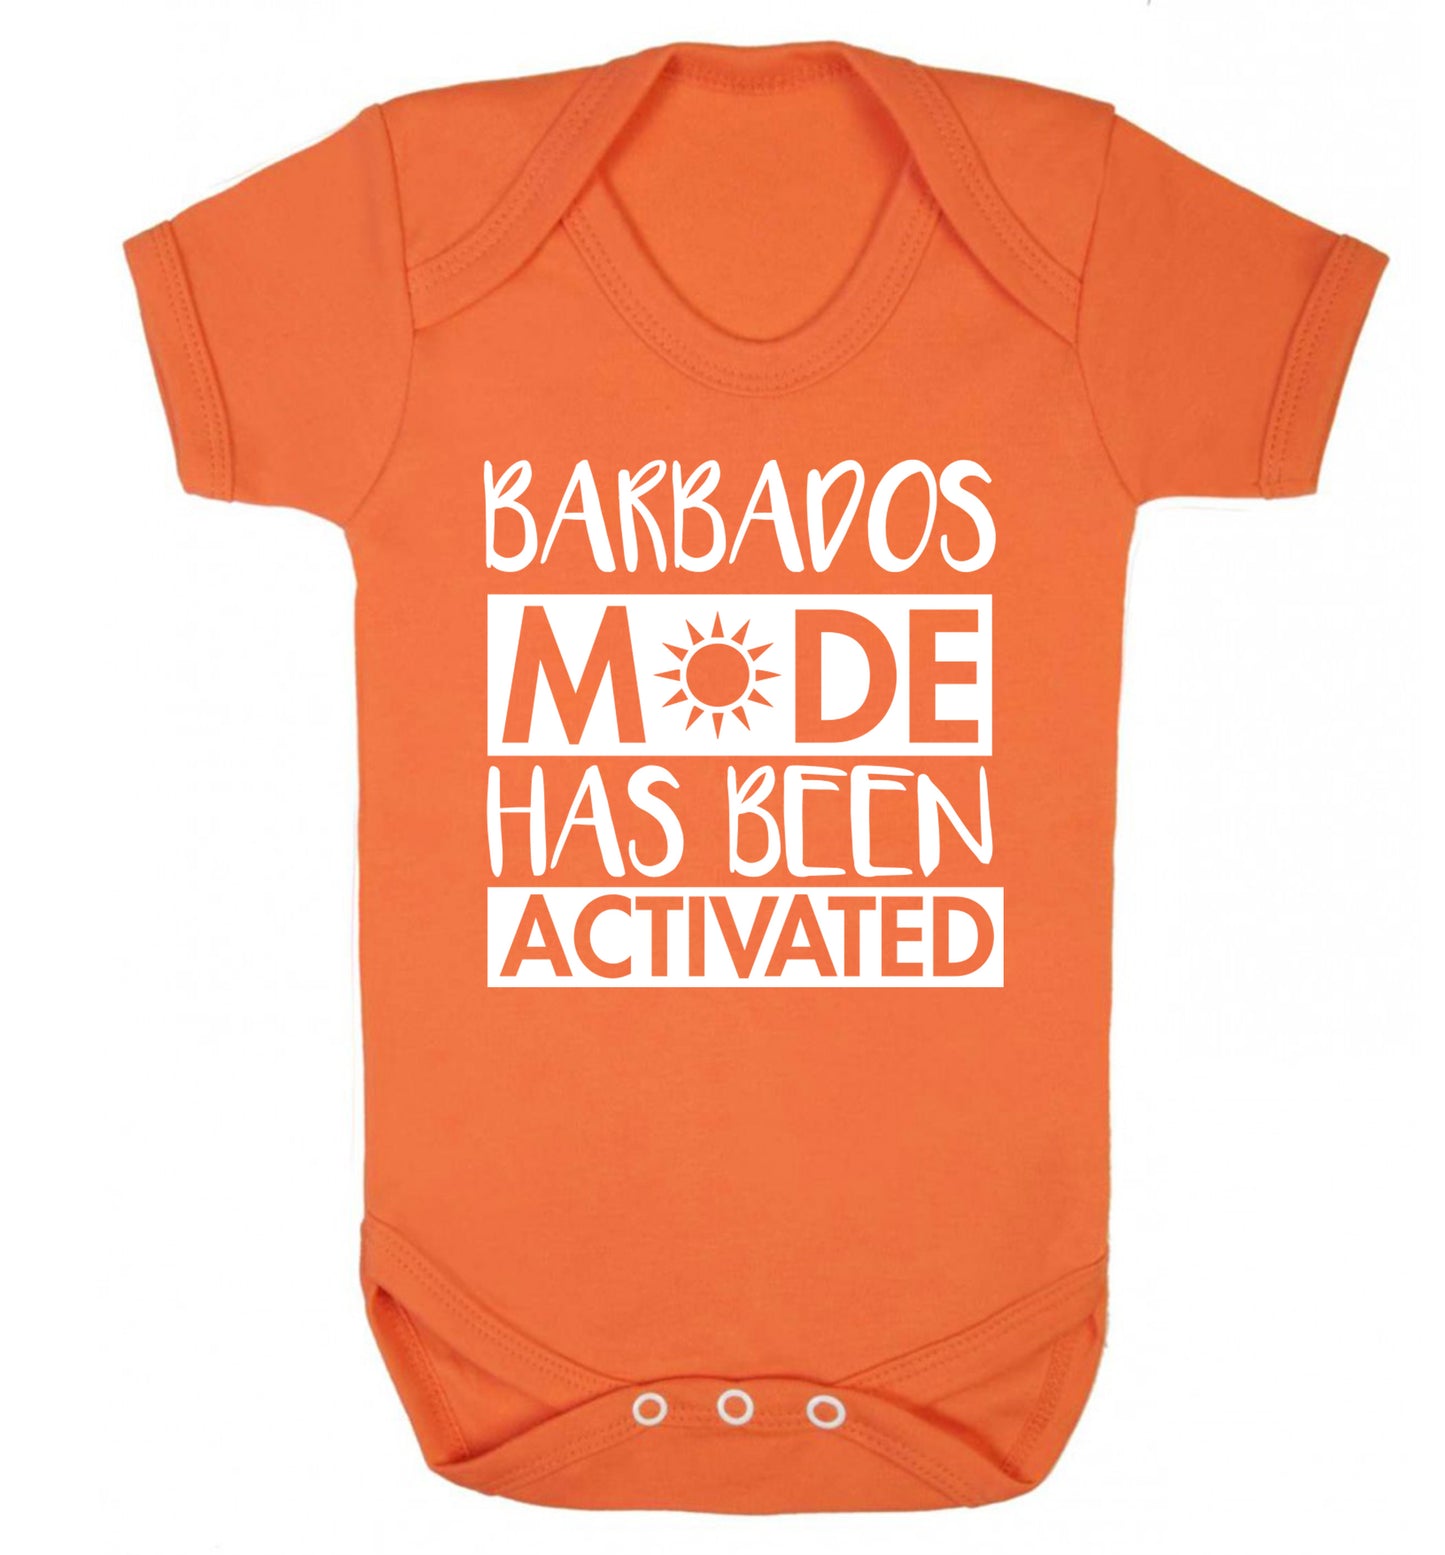 Barbados mode has been activated Baby Vest orange 18-24 months